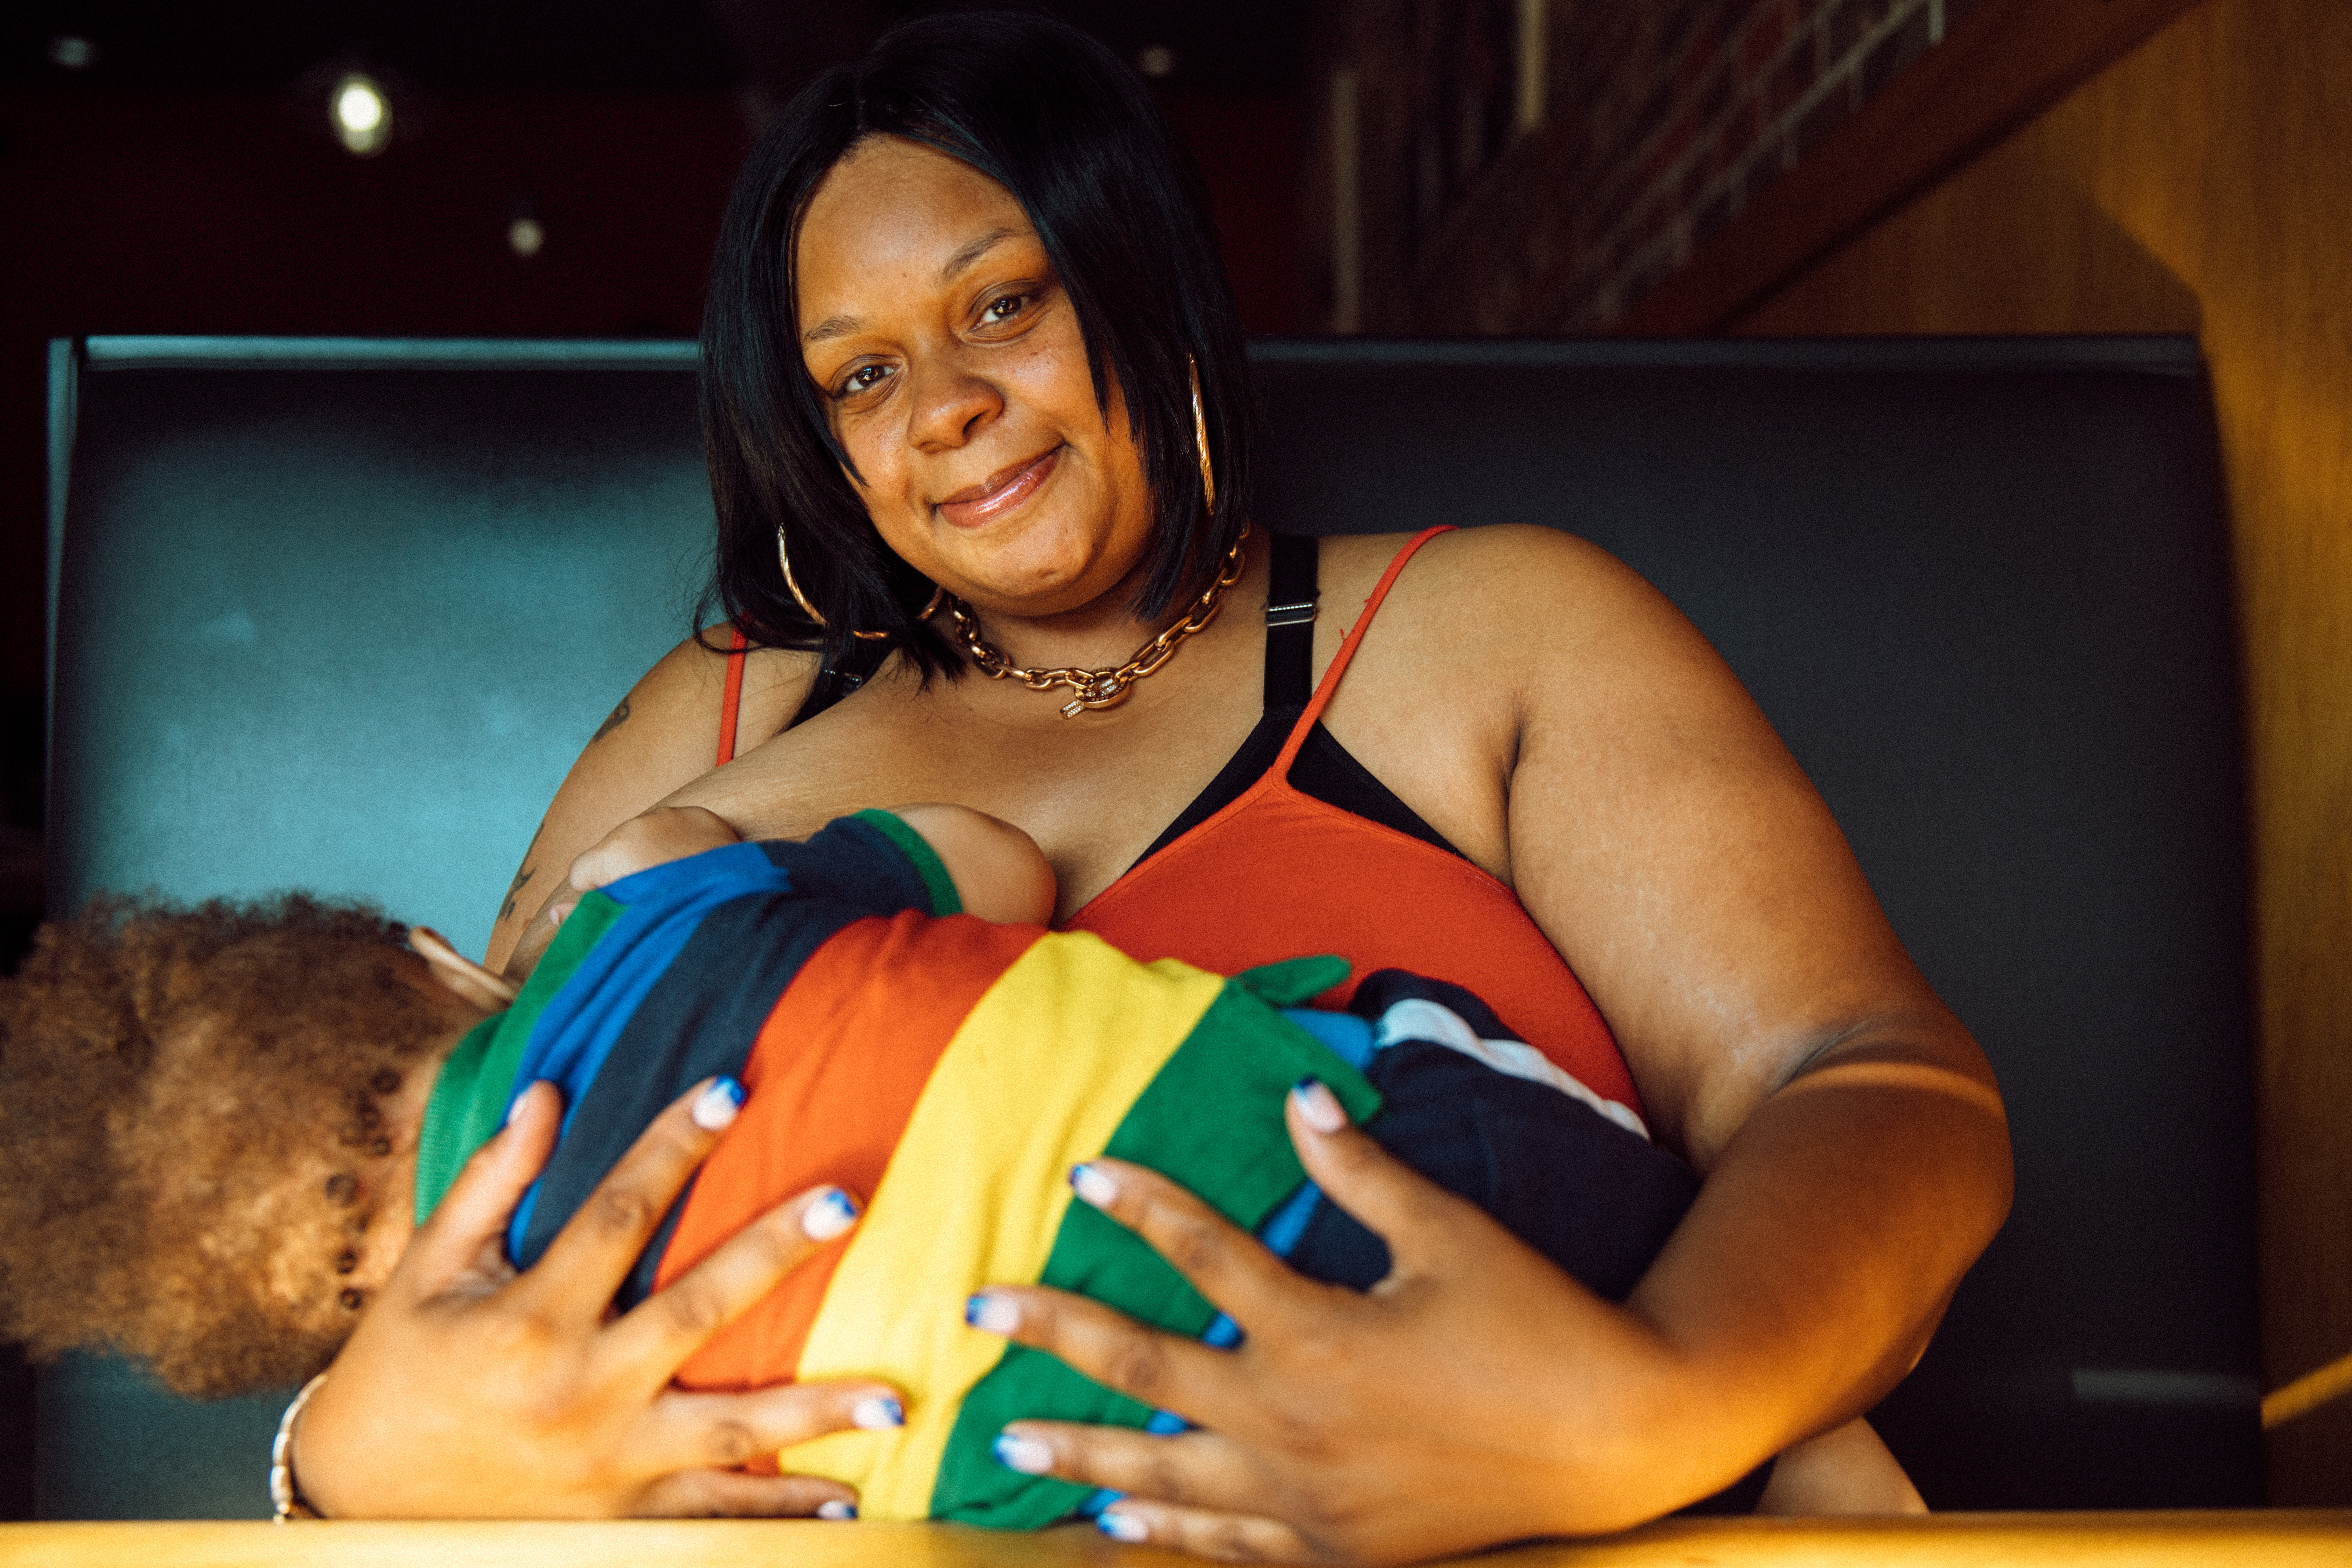 Robena Hill breastfeeds her son at a restaurant.